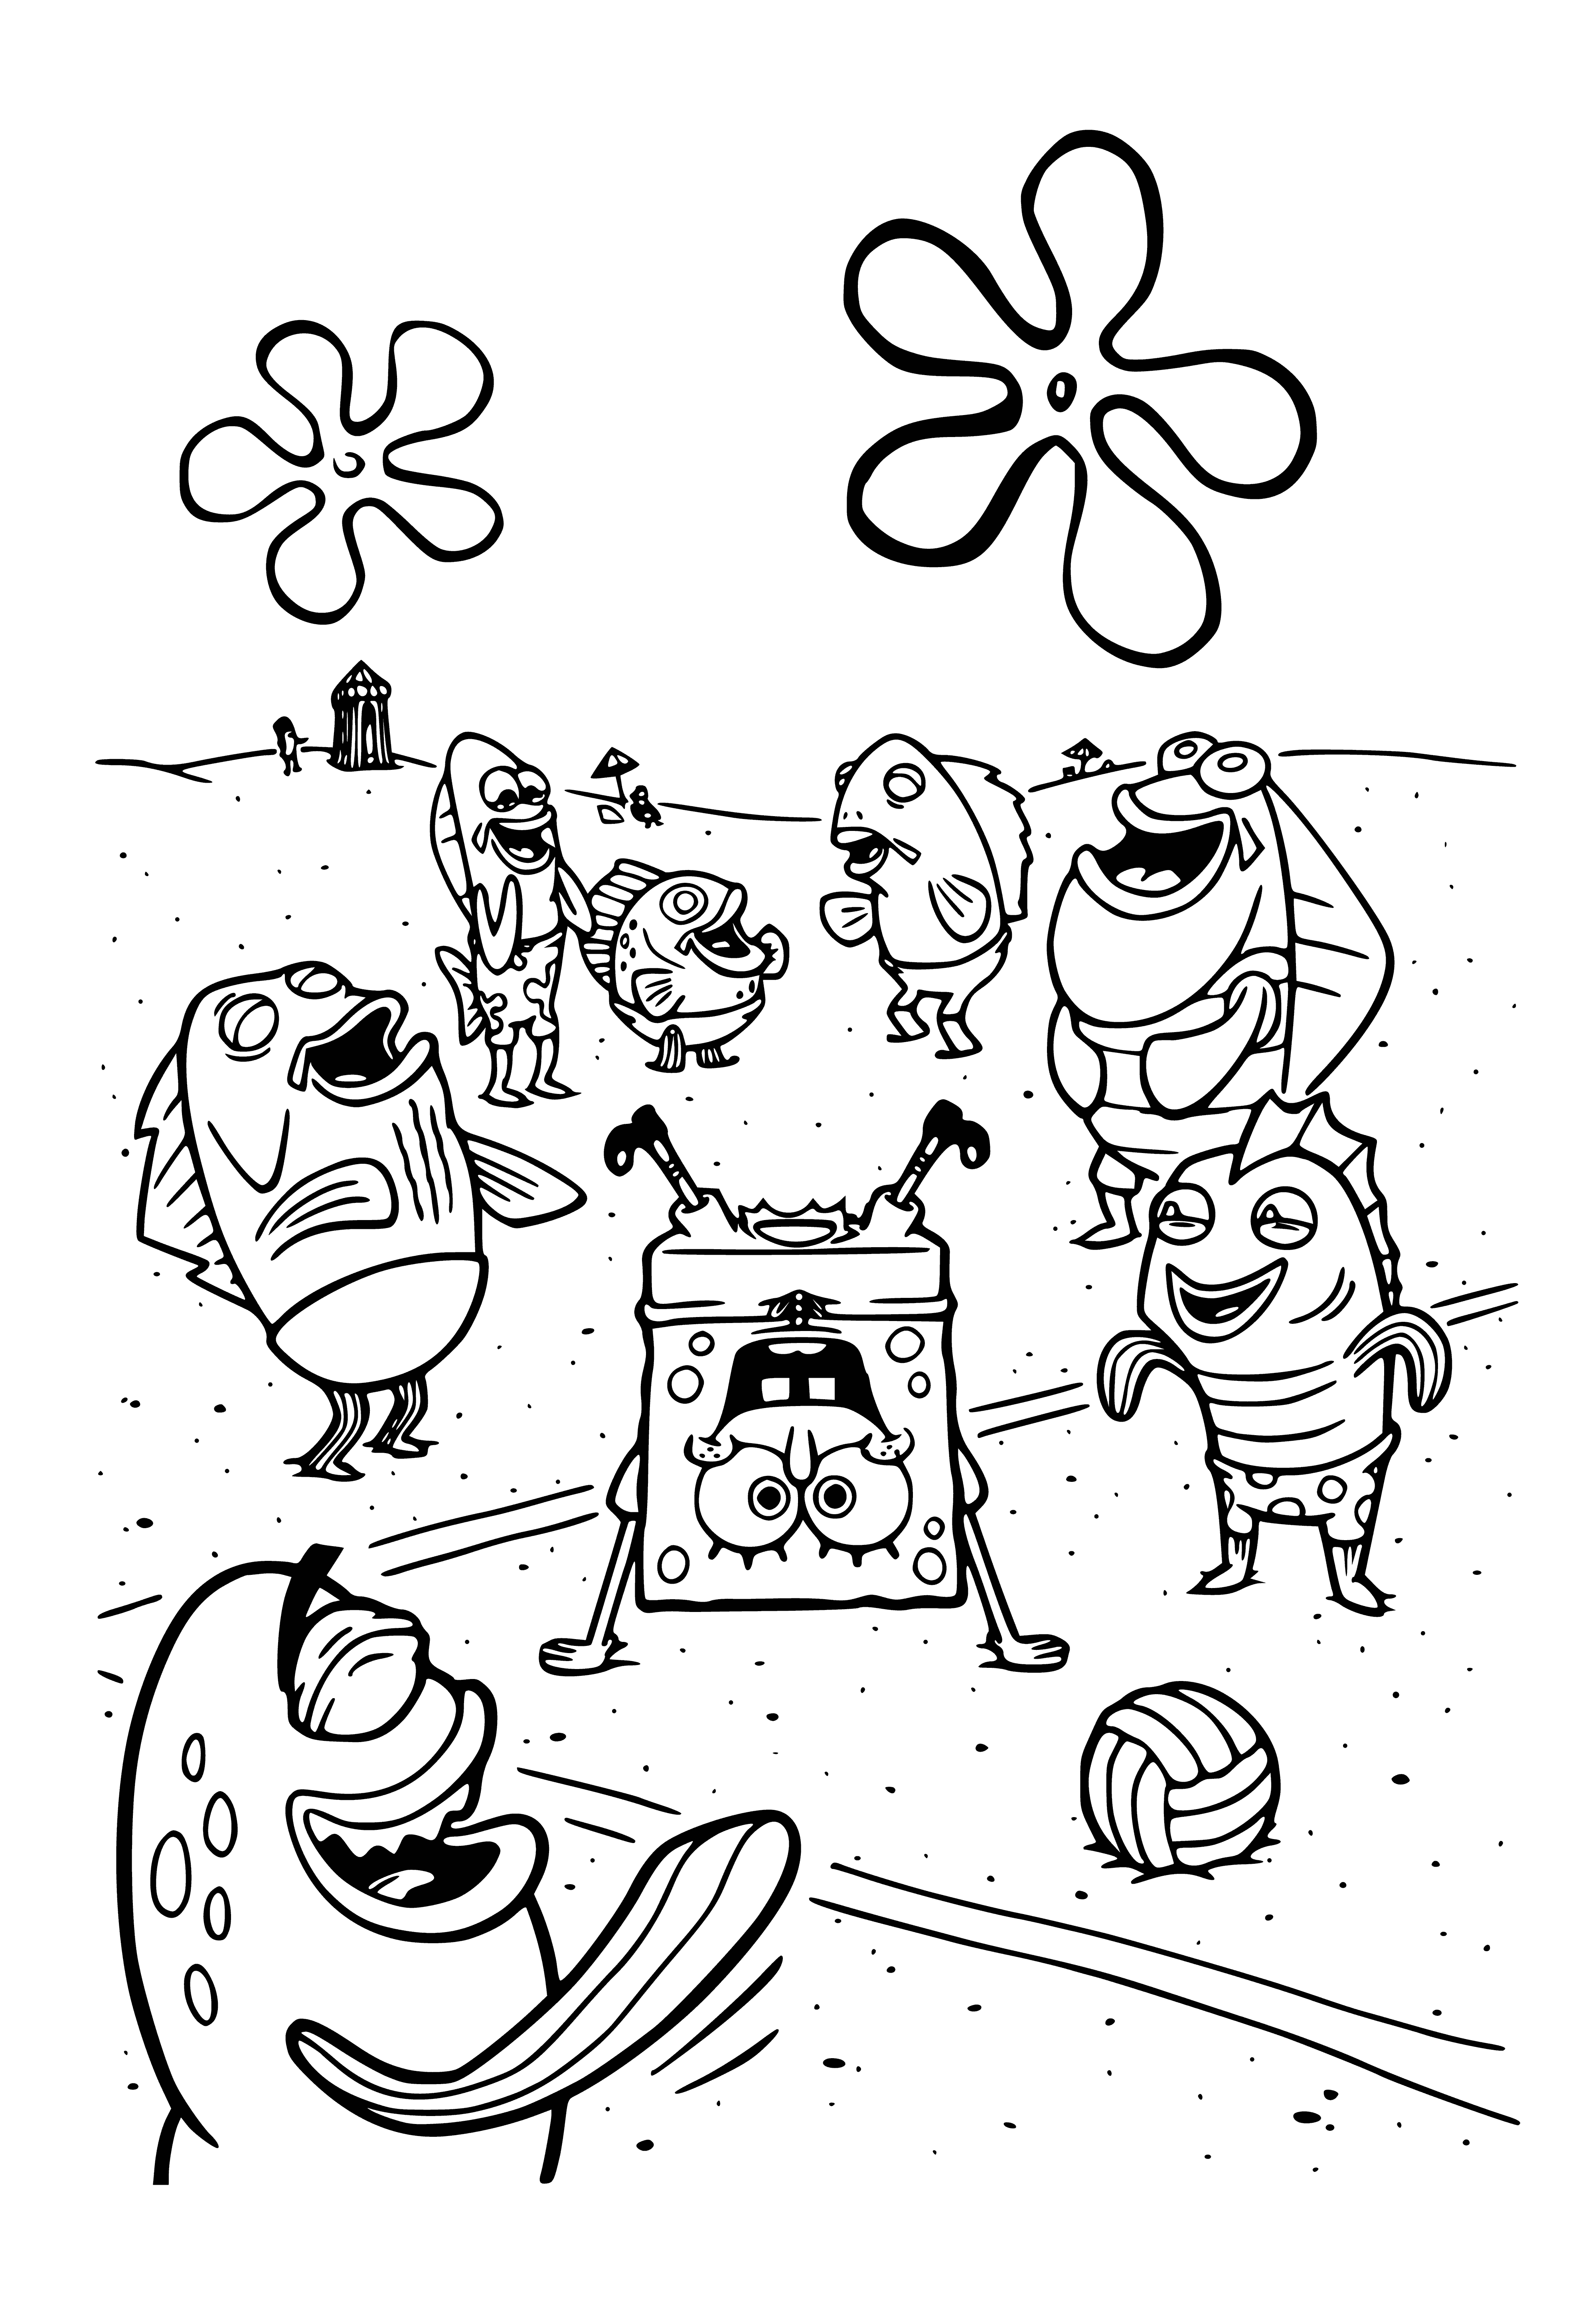 On the beach coloring page